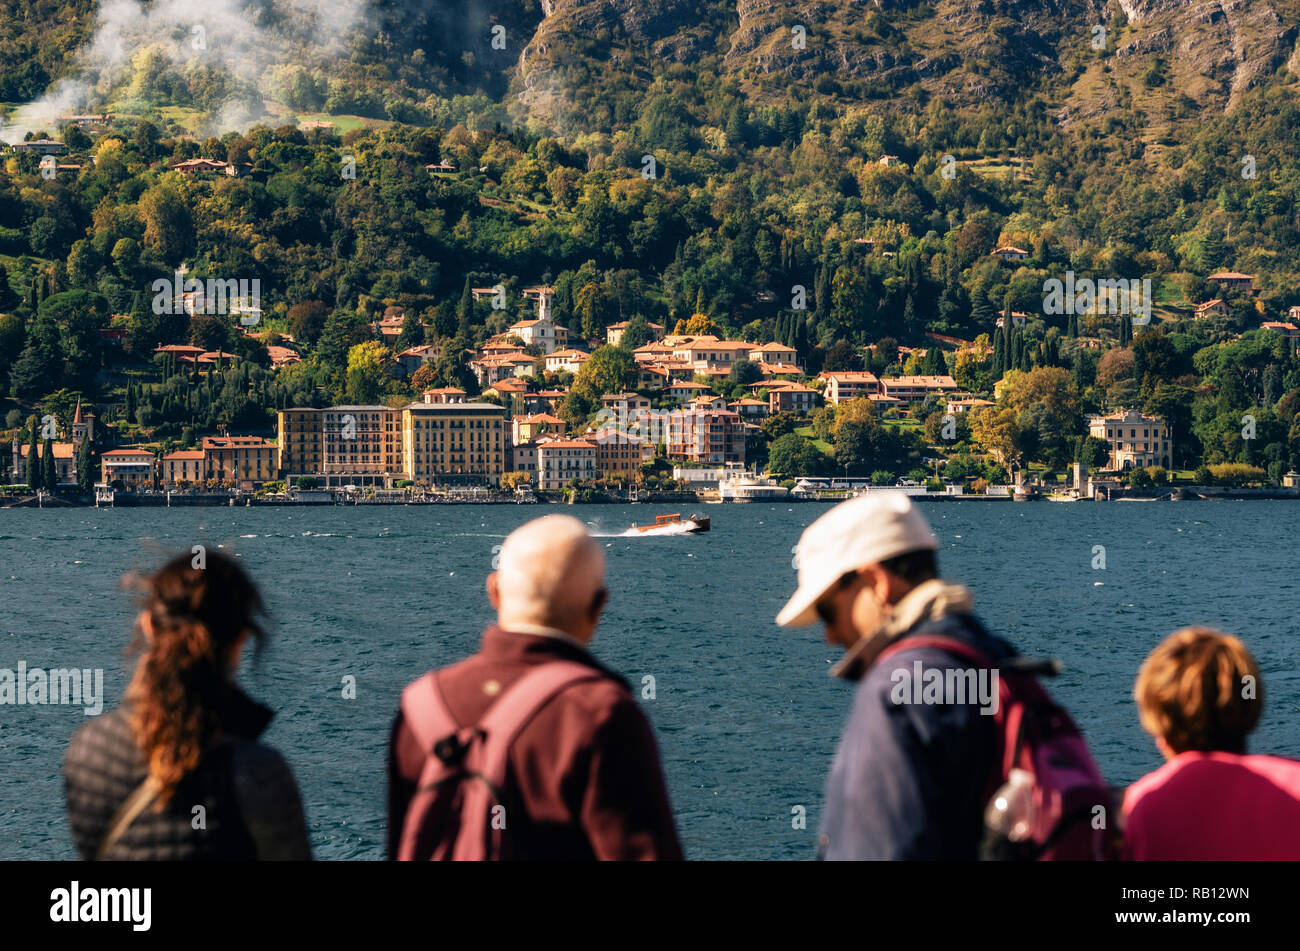 Cadenabbia, Italy - October 7, 2017: Tourists watch how boat moves against Cadenabbia town with buildings and hotels, coast of beautiful Como lake, It Stock Photo